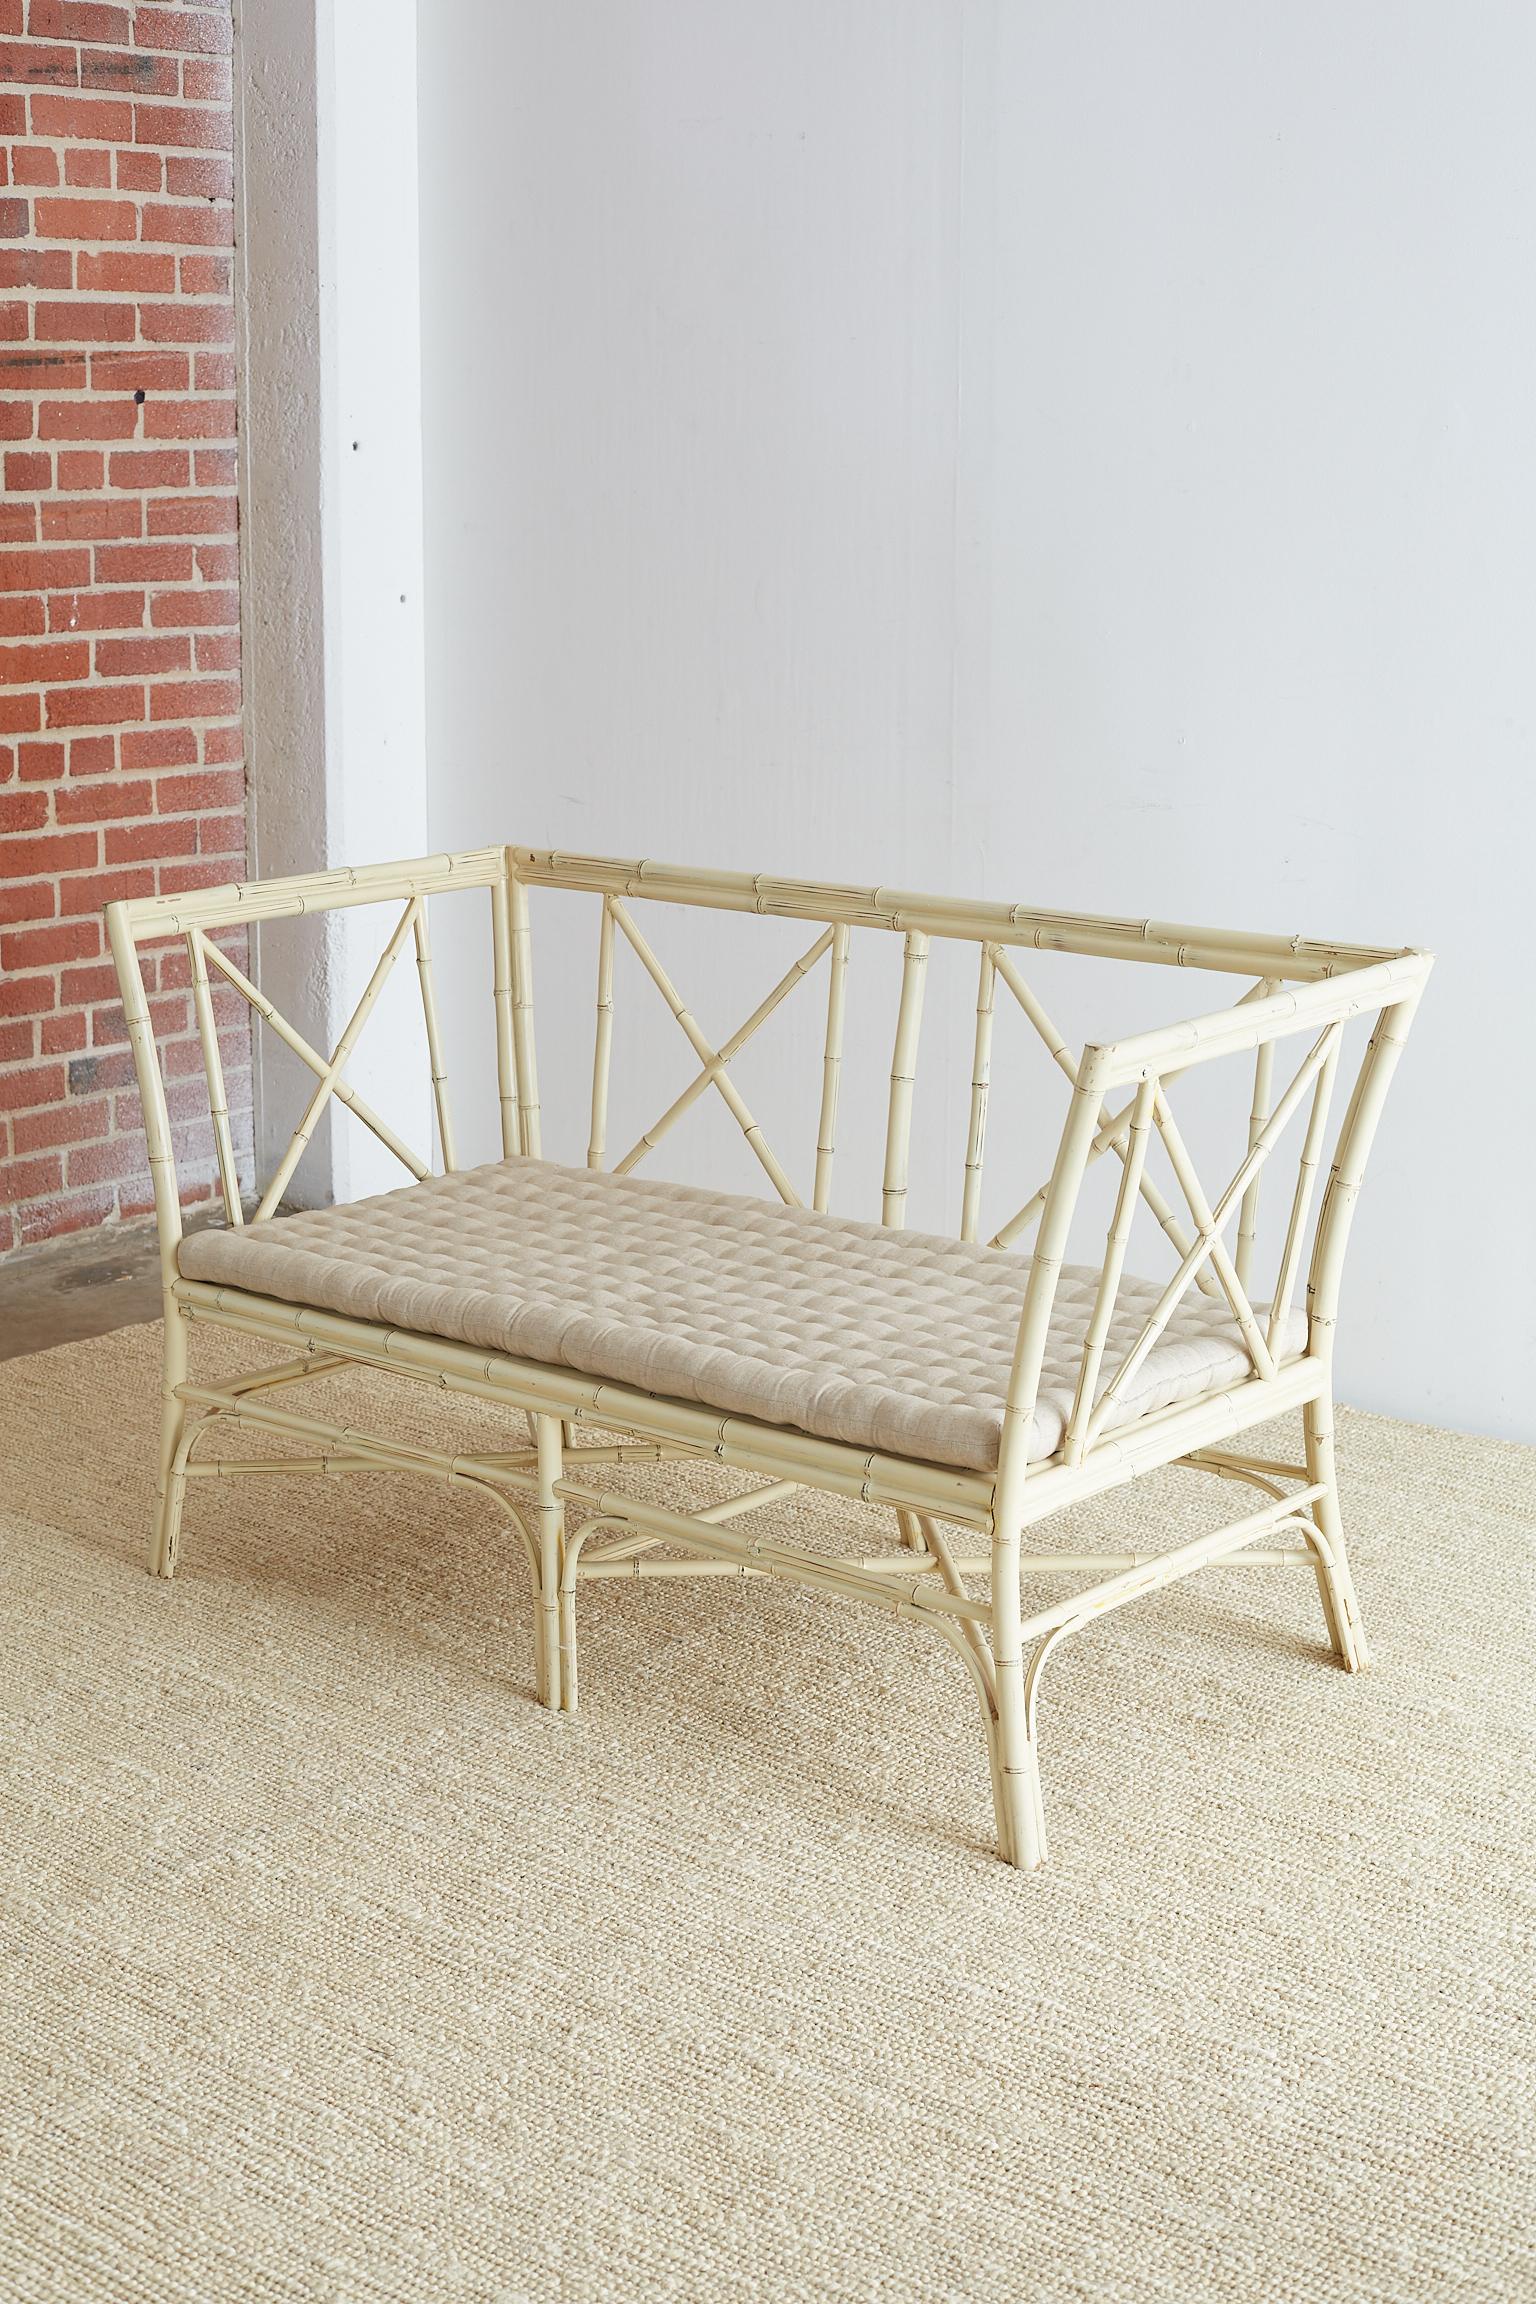 Elegant Hollywood Regency bamboo settee or bench featuring a cream colored lacquer finish. Delicate frame constructed from reeds of bamboo in a geometric pattern with X-form motif back, sides, and stretchers. Supported by six legs with a tufted seat